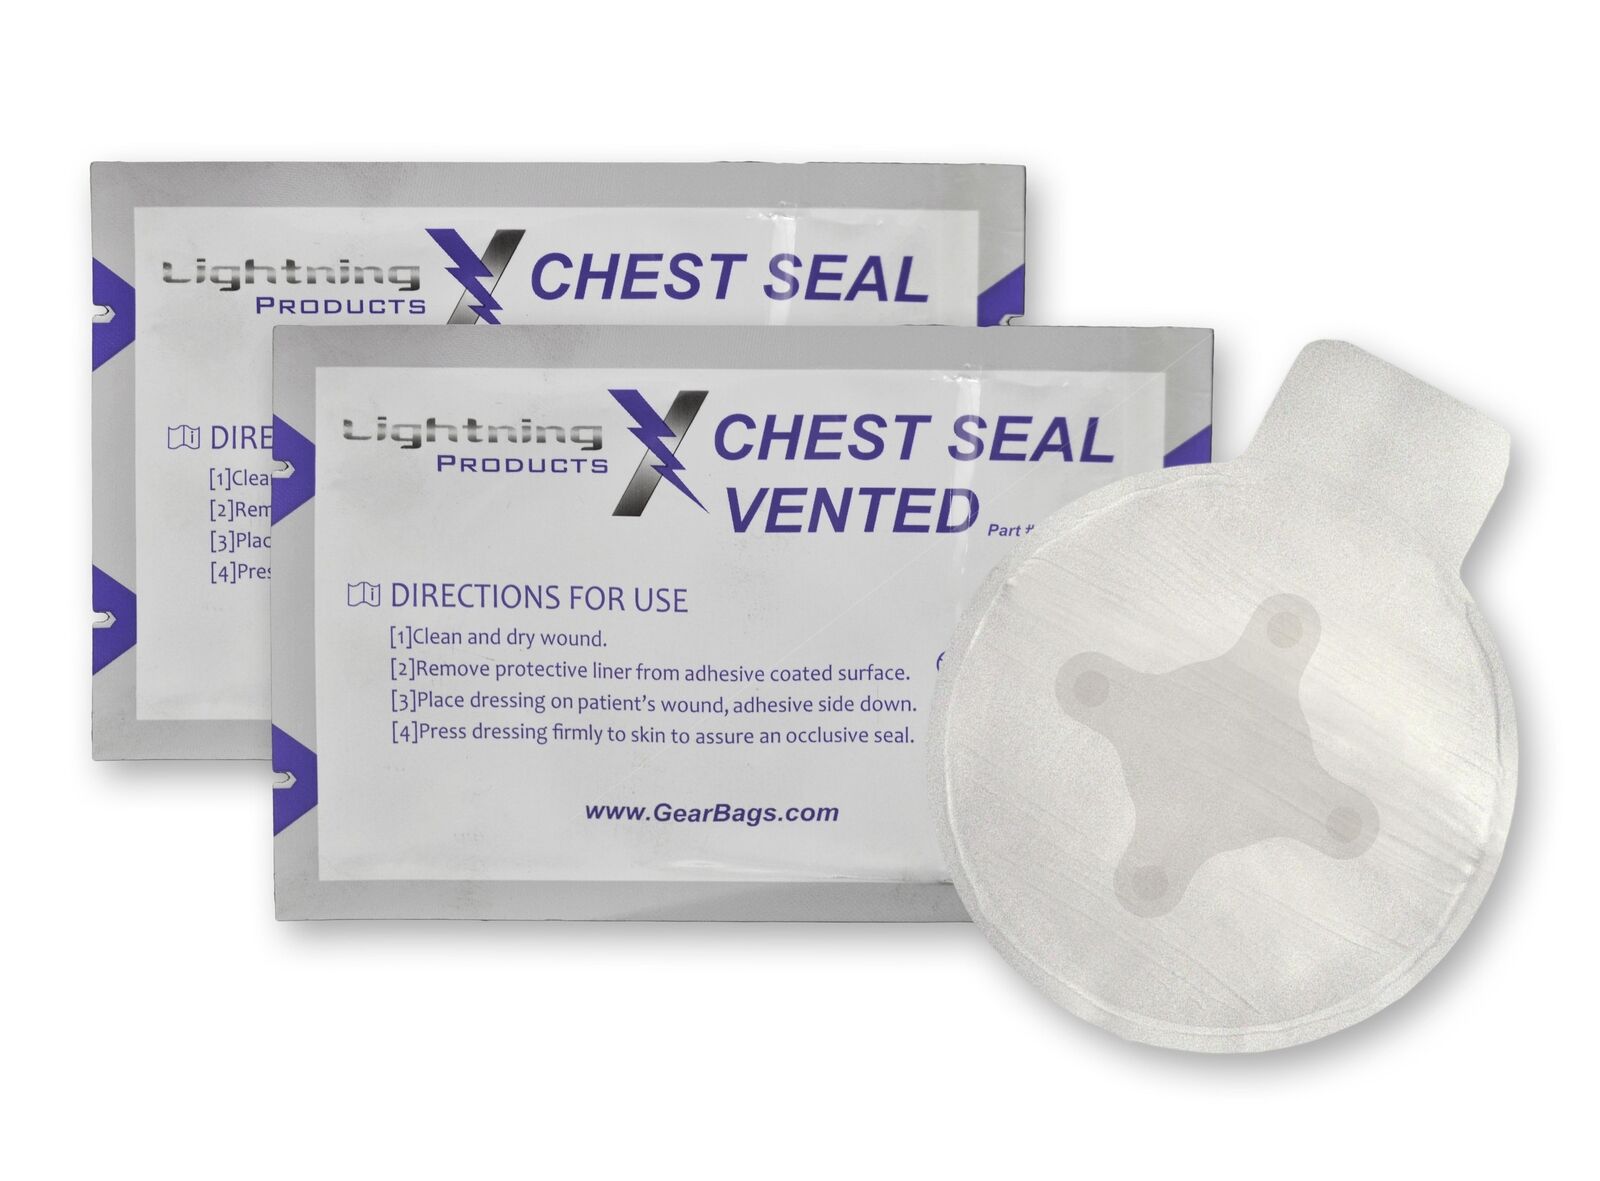 LIGHTNING X Vented Chest Seal, TWIN PACK, 6